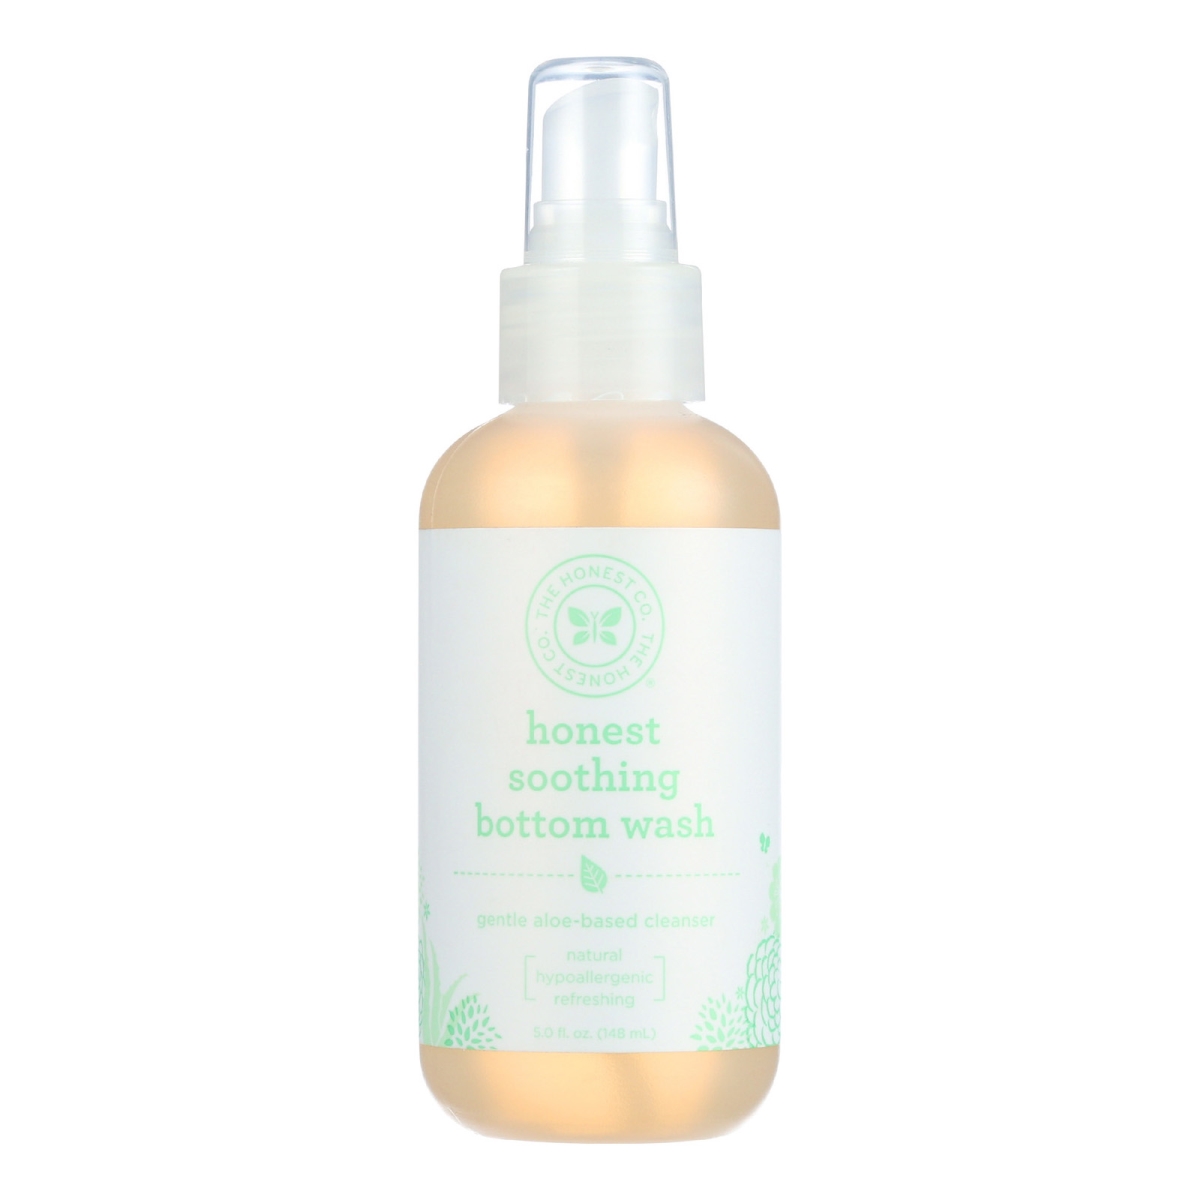 Picture of The Honest 1616473 5 oz Soothing Bottom Wash